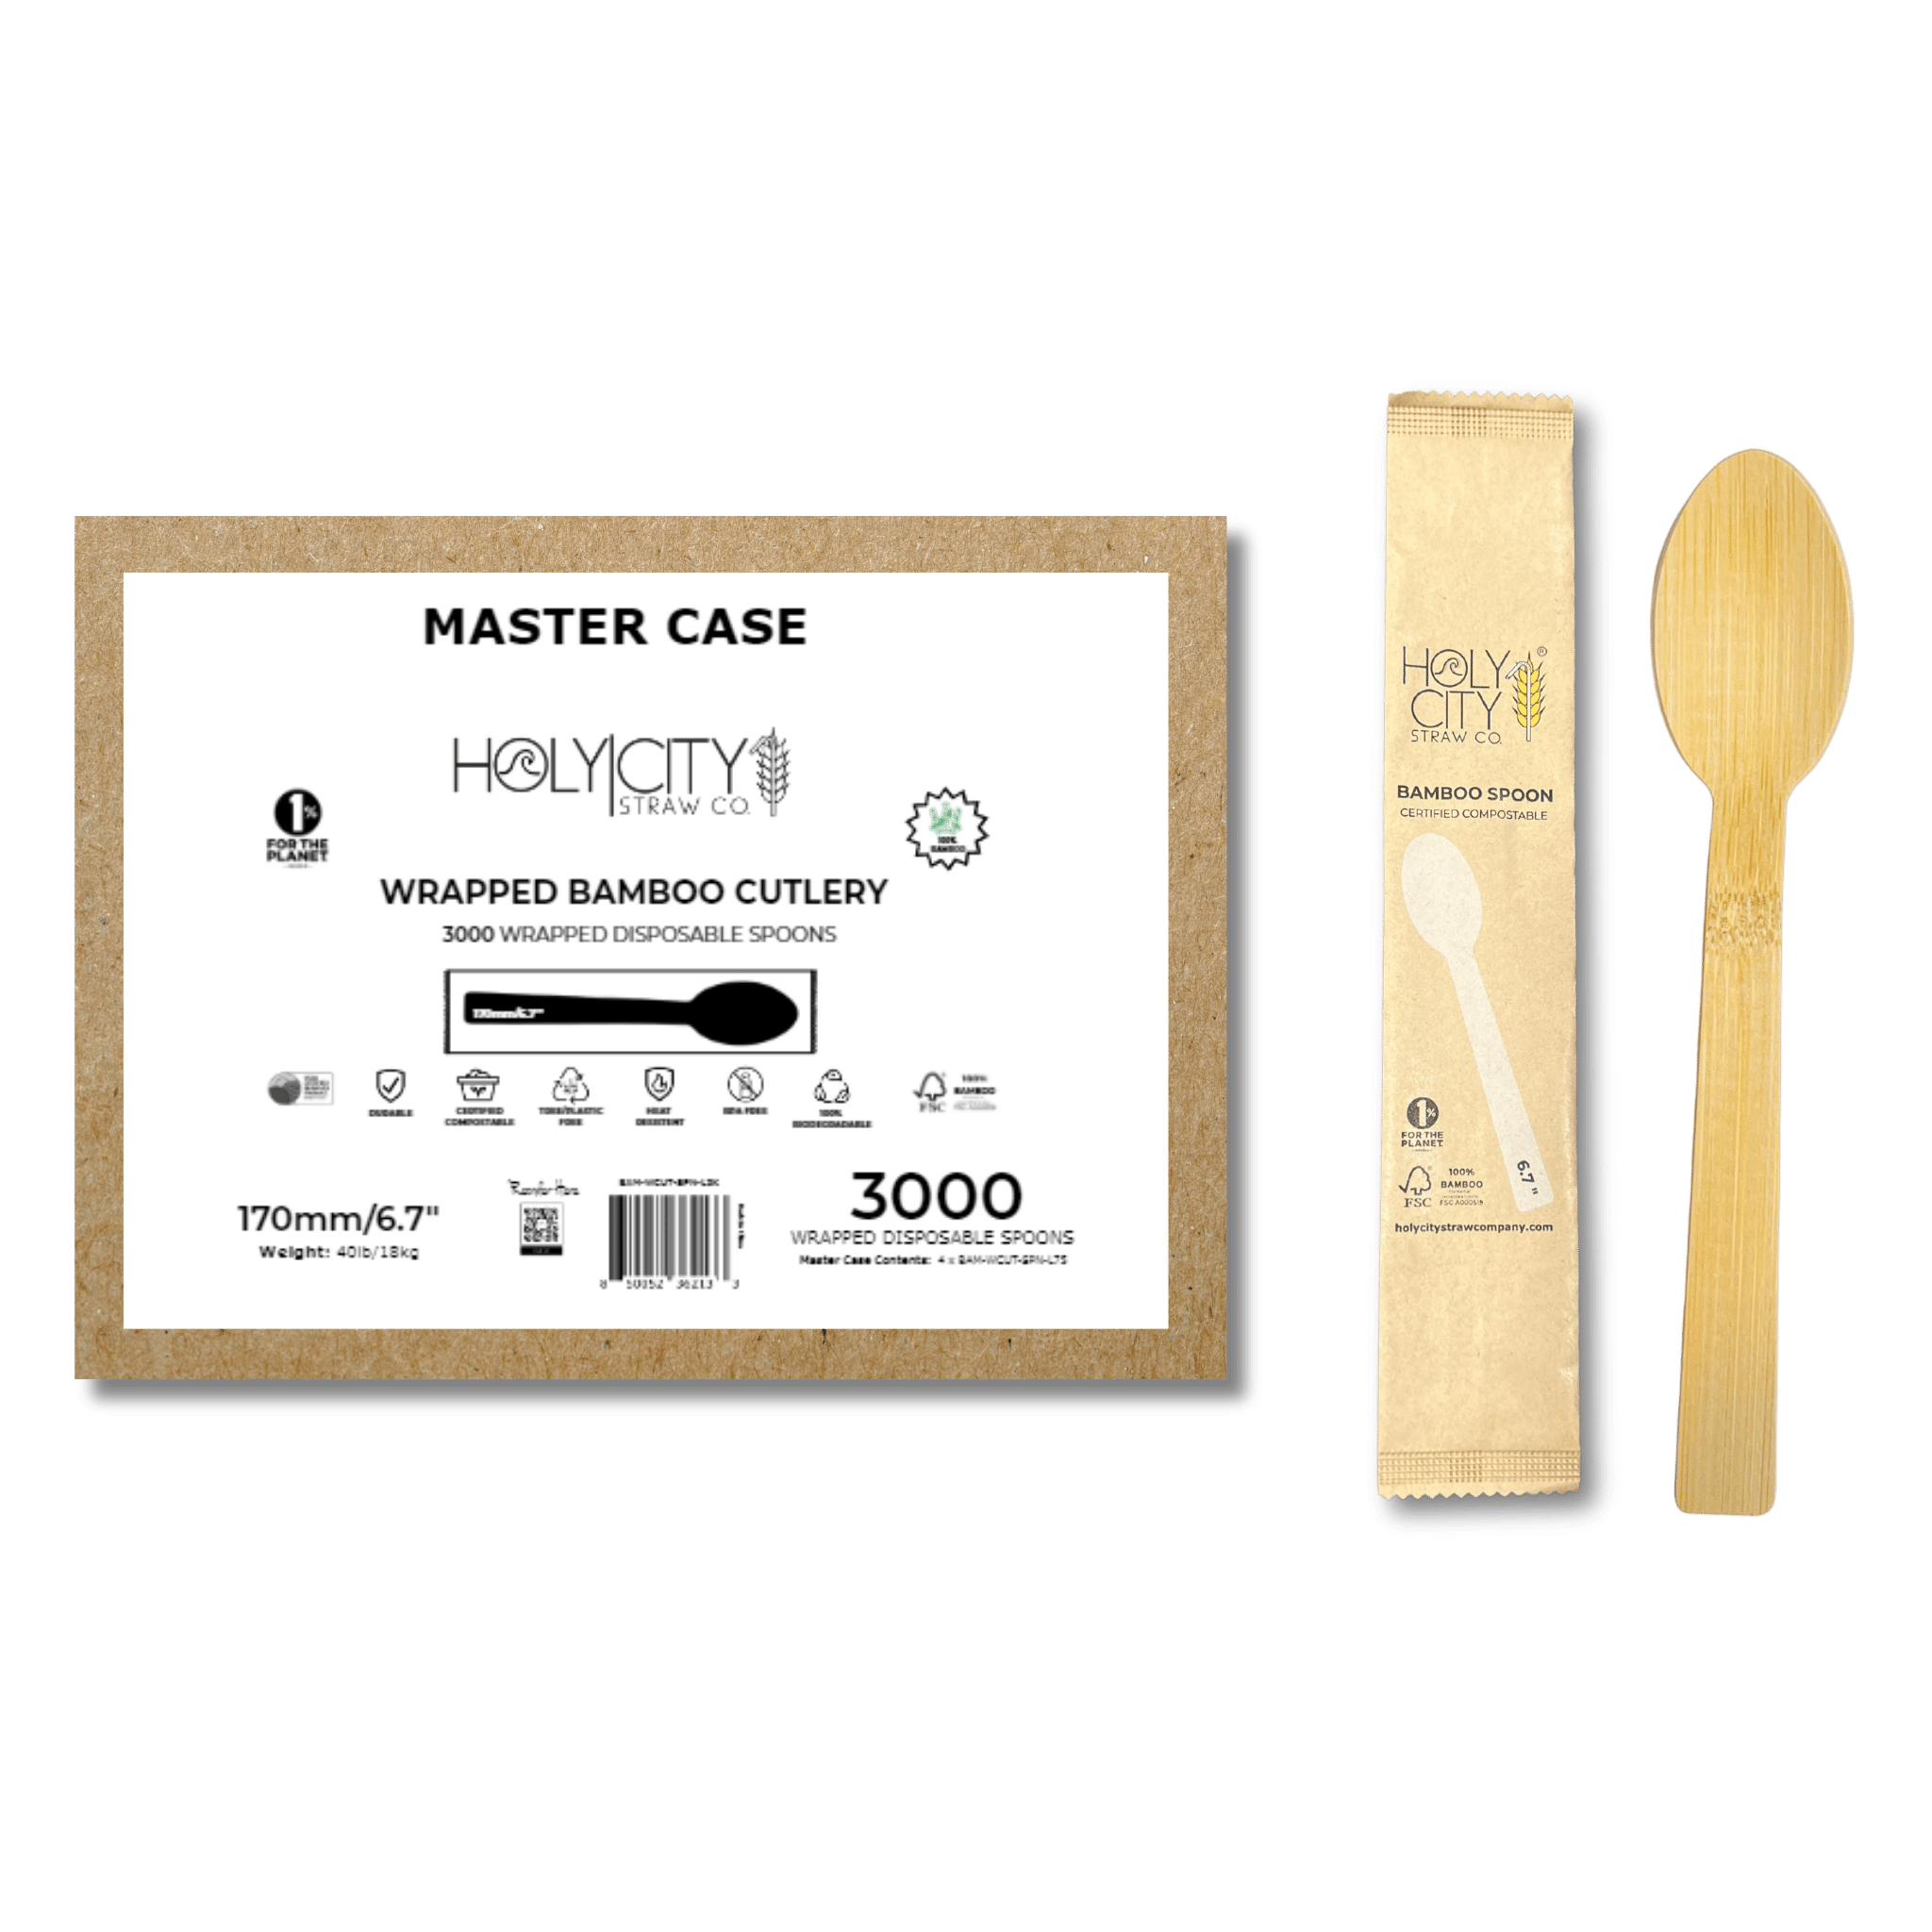 Master Case of Holy City Straw Company Wrapped Bamboo Spoons 3000 disposable spoons each individually wrapped